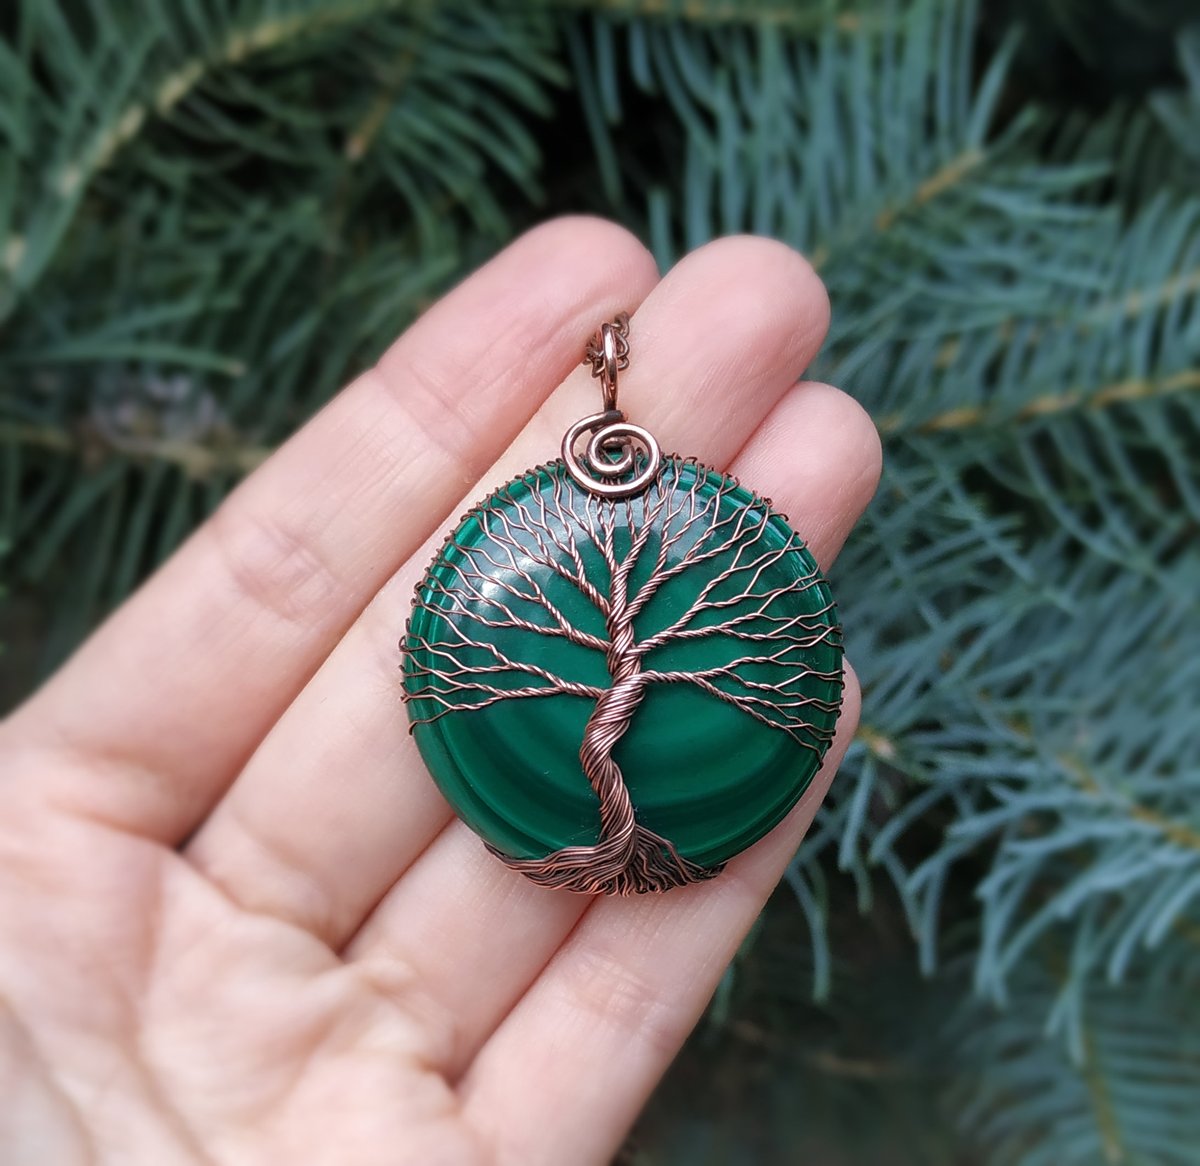 Healing Malachite Tree Of Life Pendant - reminding you about 15% off sale in my Etsy shop
.
etsy.me/38i8LQE #anniversarygift #celtic #yggdrasil #healinggift #celticamulet #celticgift #vikingamulet #vikinggift #talisman